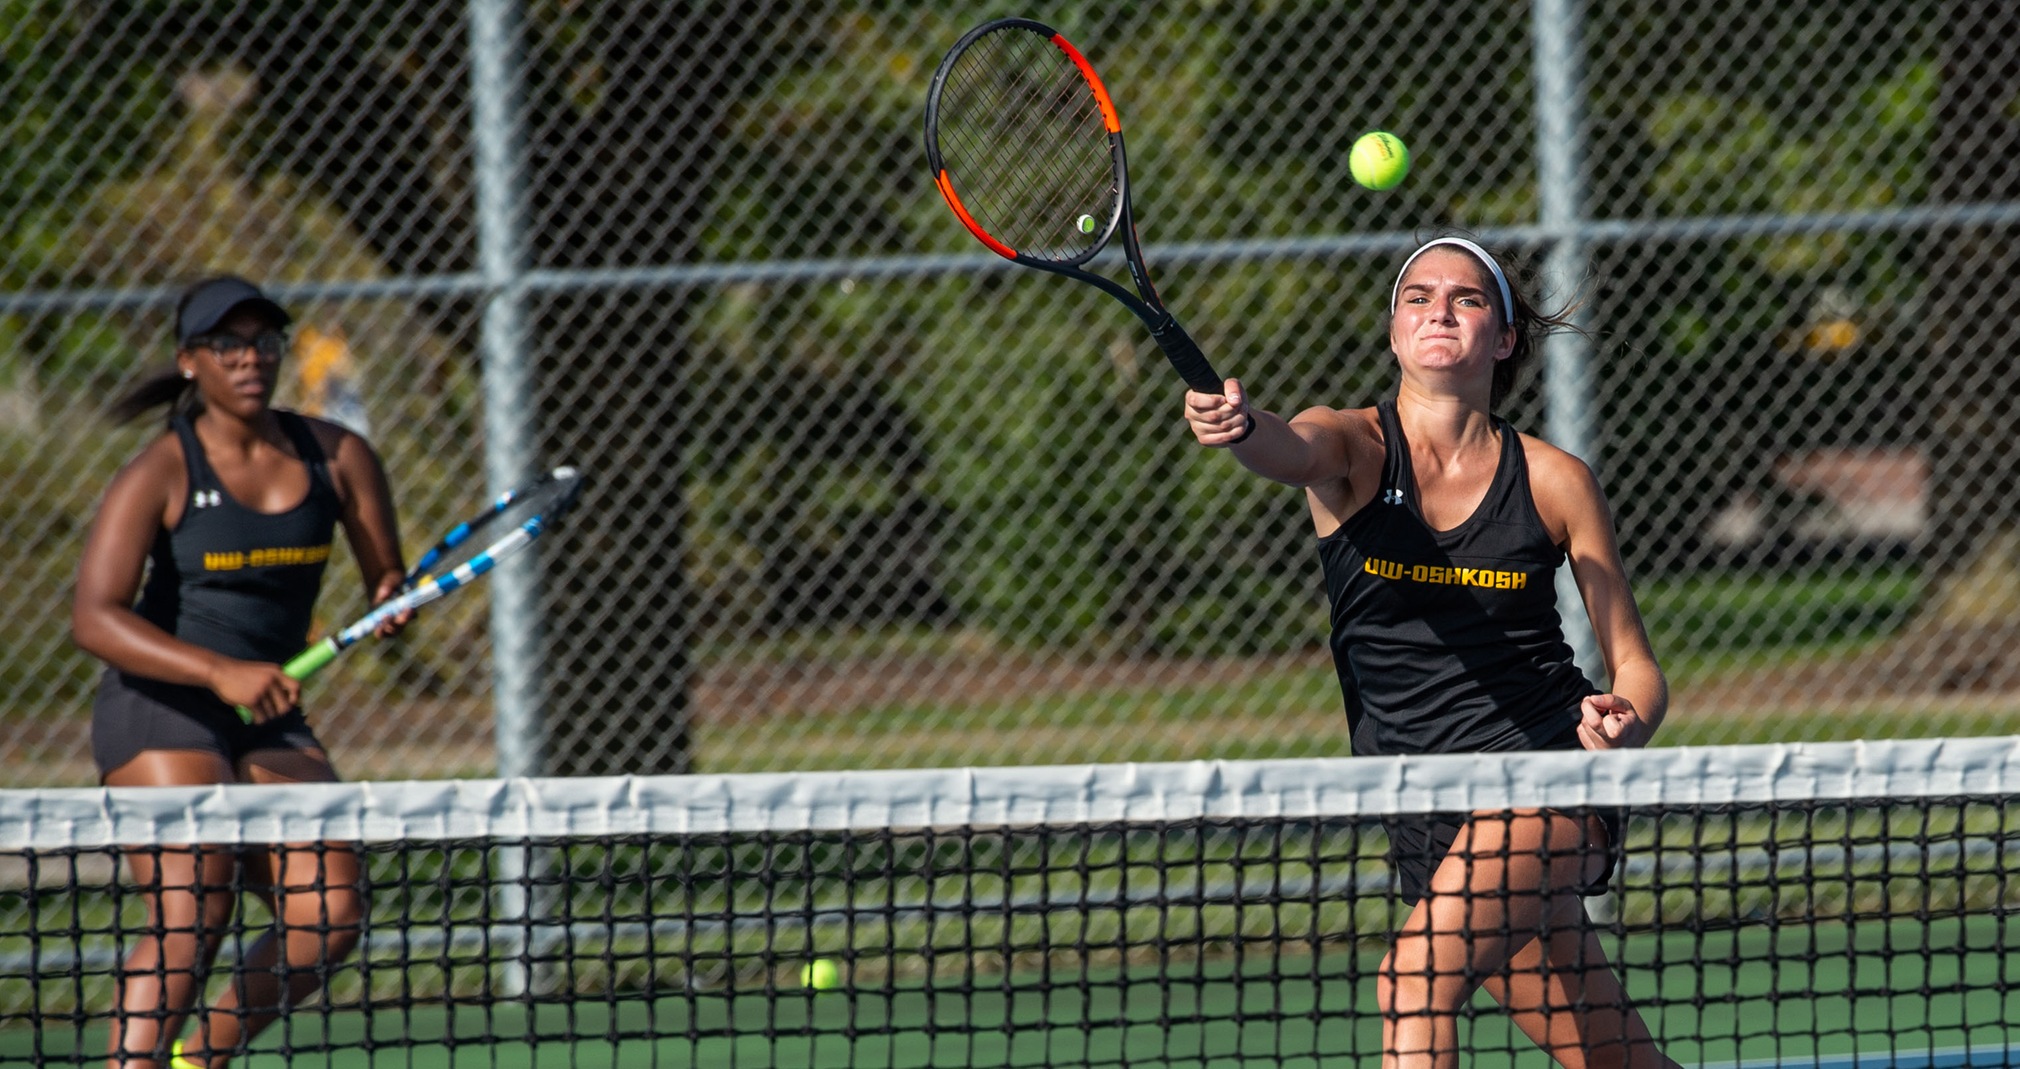 Alyssa Leffer (right) and Michelle Spicer were involved in two victories apiece against the Pointers, including their win at No. 1 doubles.